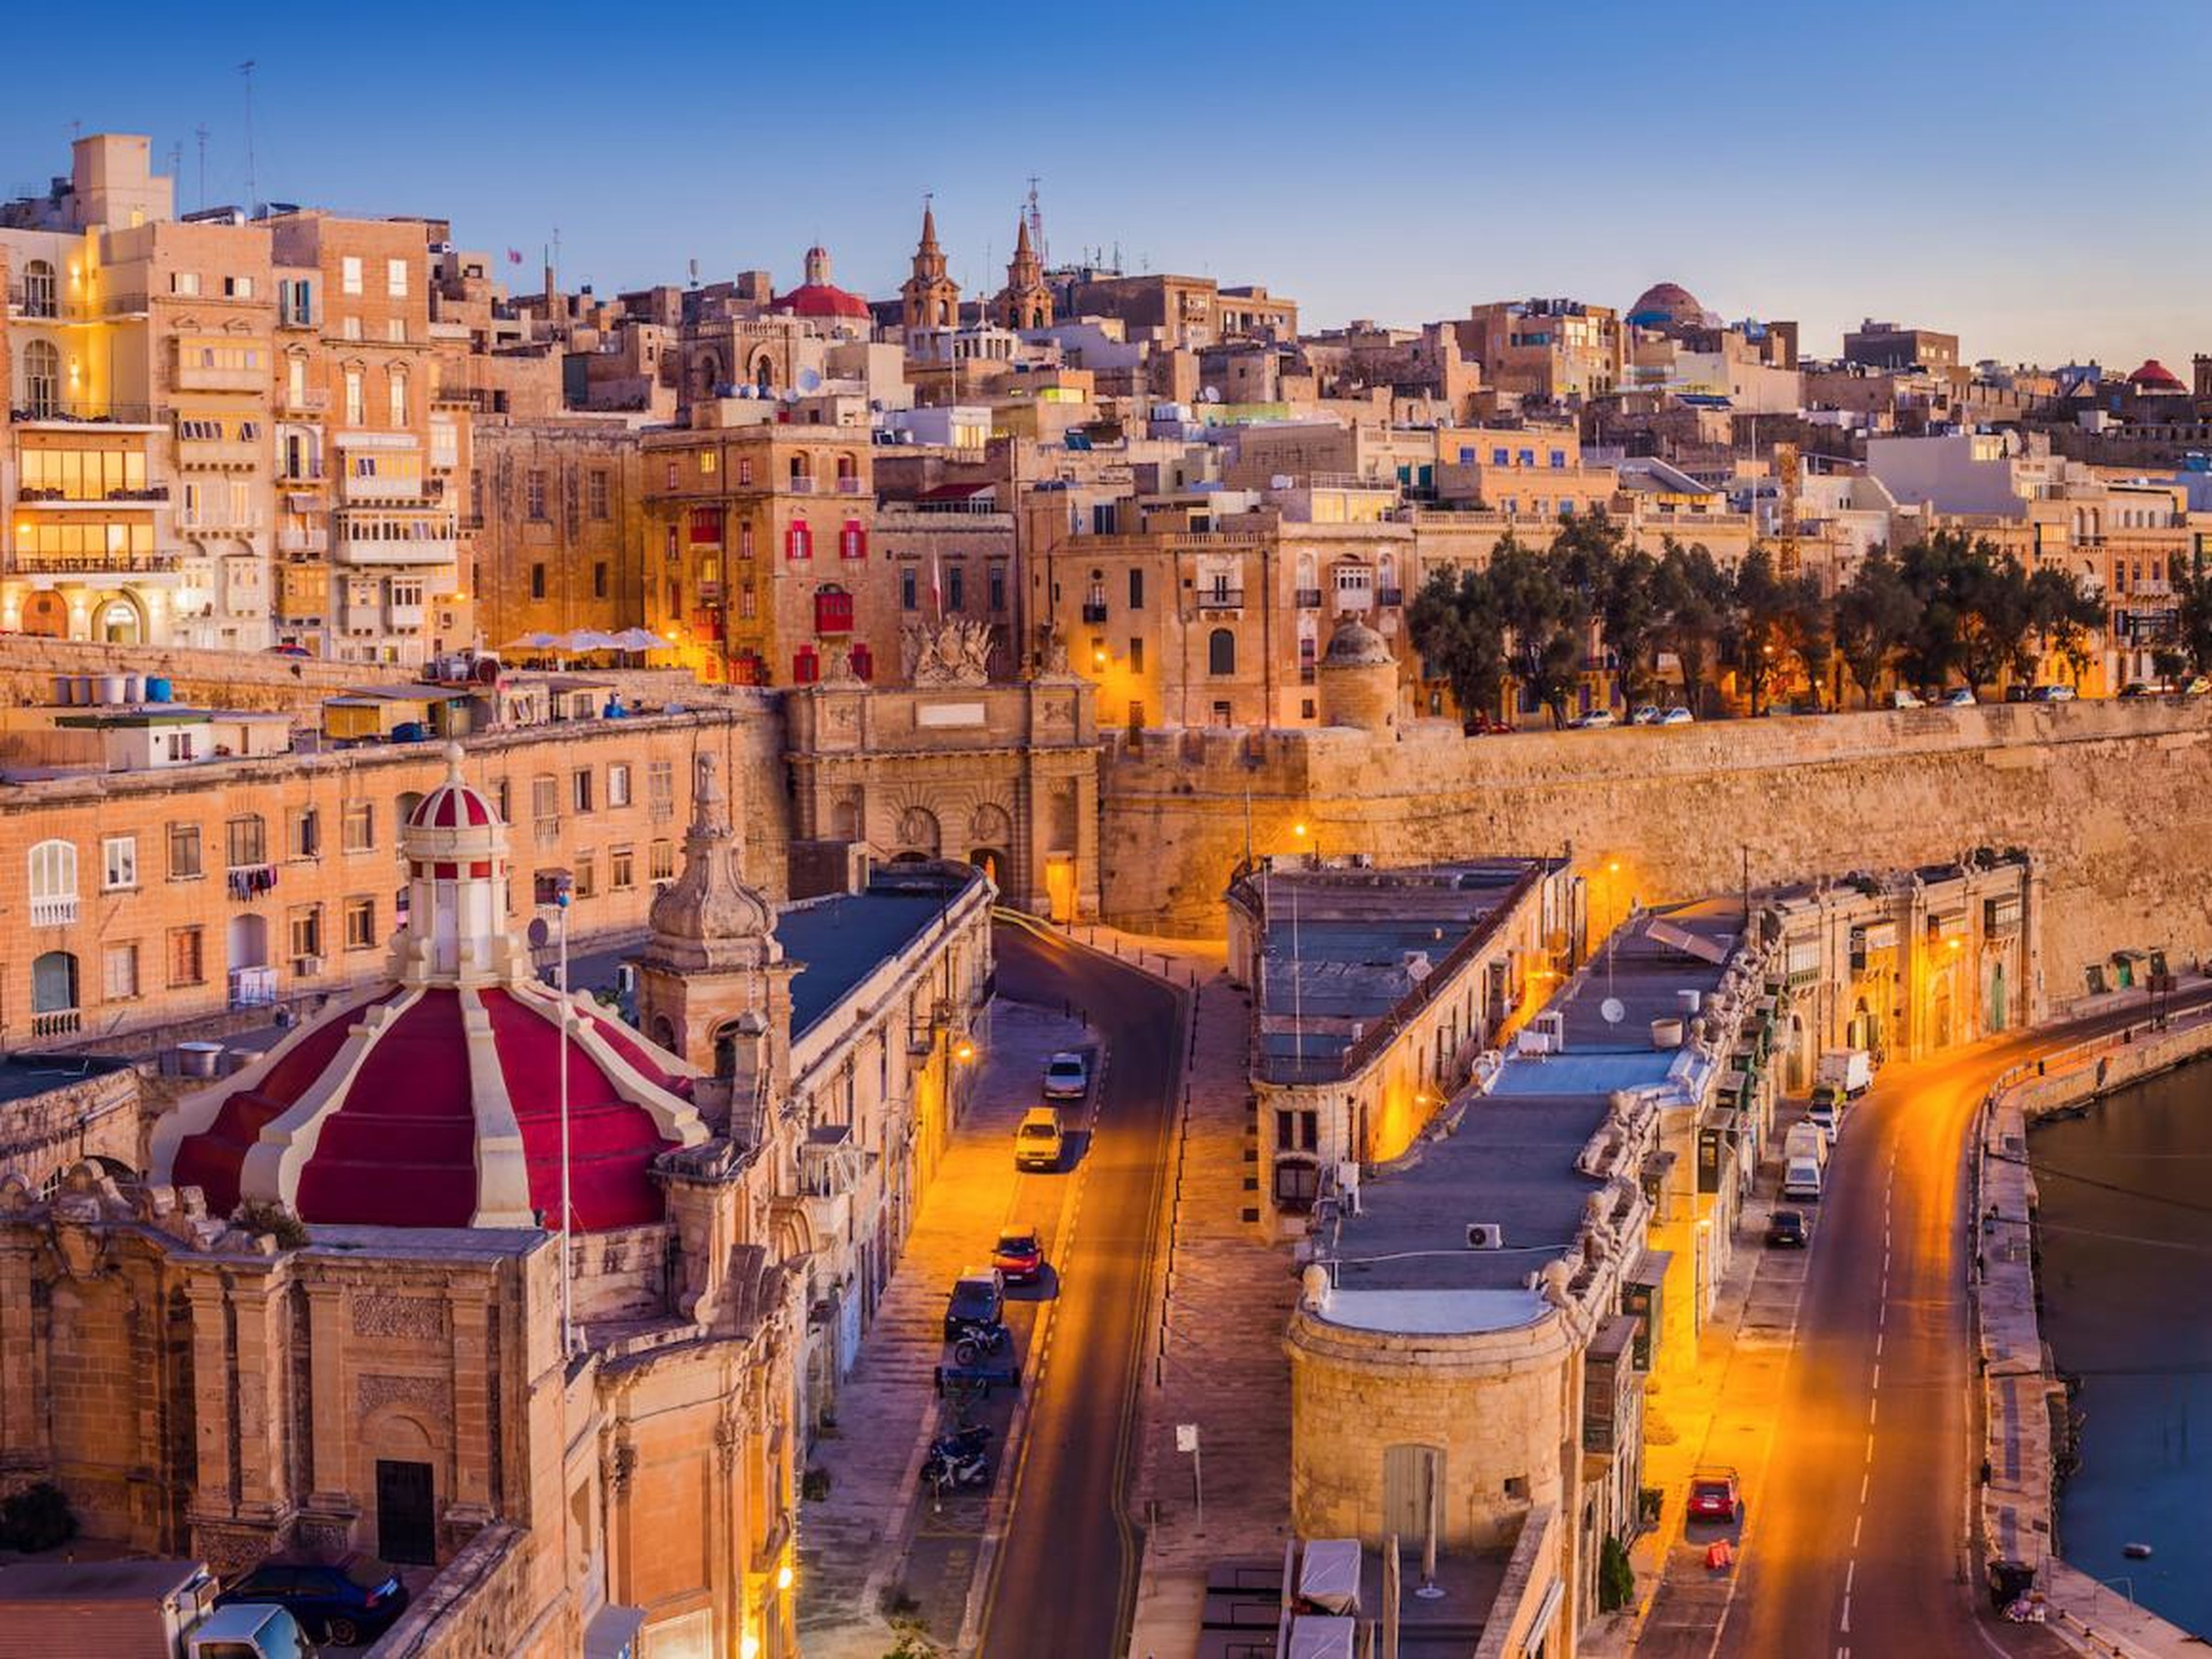 Foreign buyers are snapping up real estate in Malta.